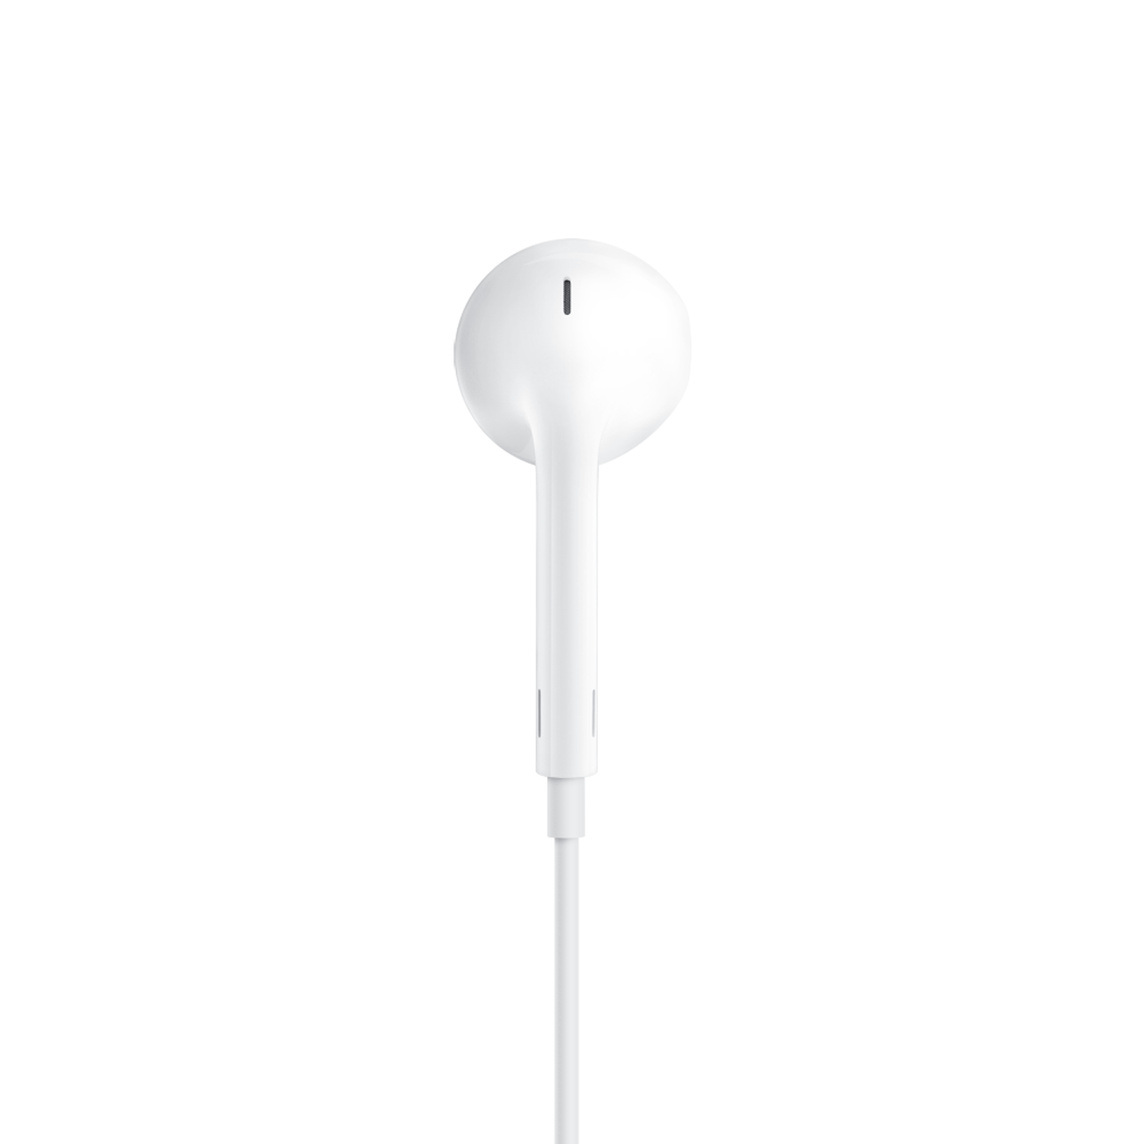 GENIUNE APPLE ORIGINAL LIGHTNING EARPODS APPLE IN EAR EARPHONES AND HEADPHONE WITH MICROPHONE FOR IPHONE 7 TO THE IPHONE 12PRO M